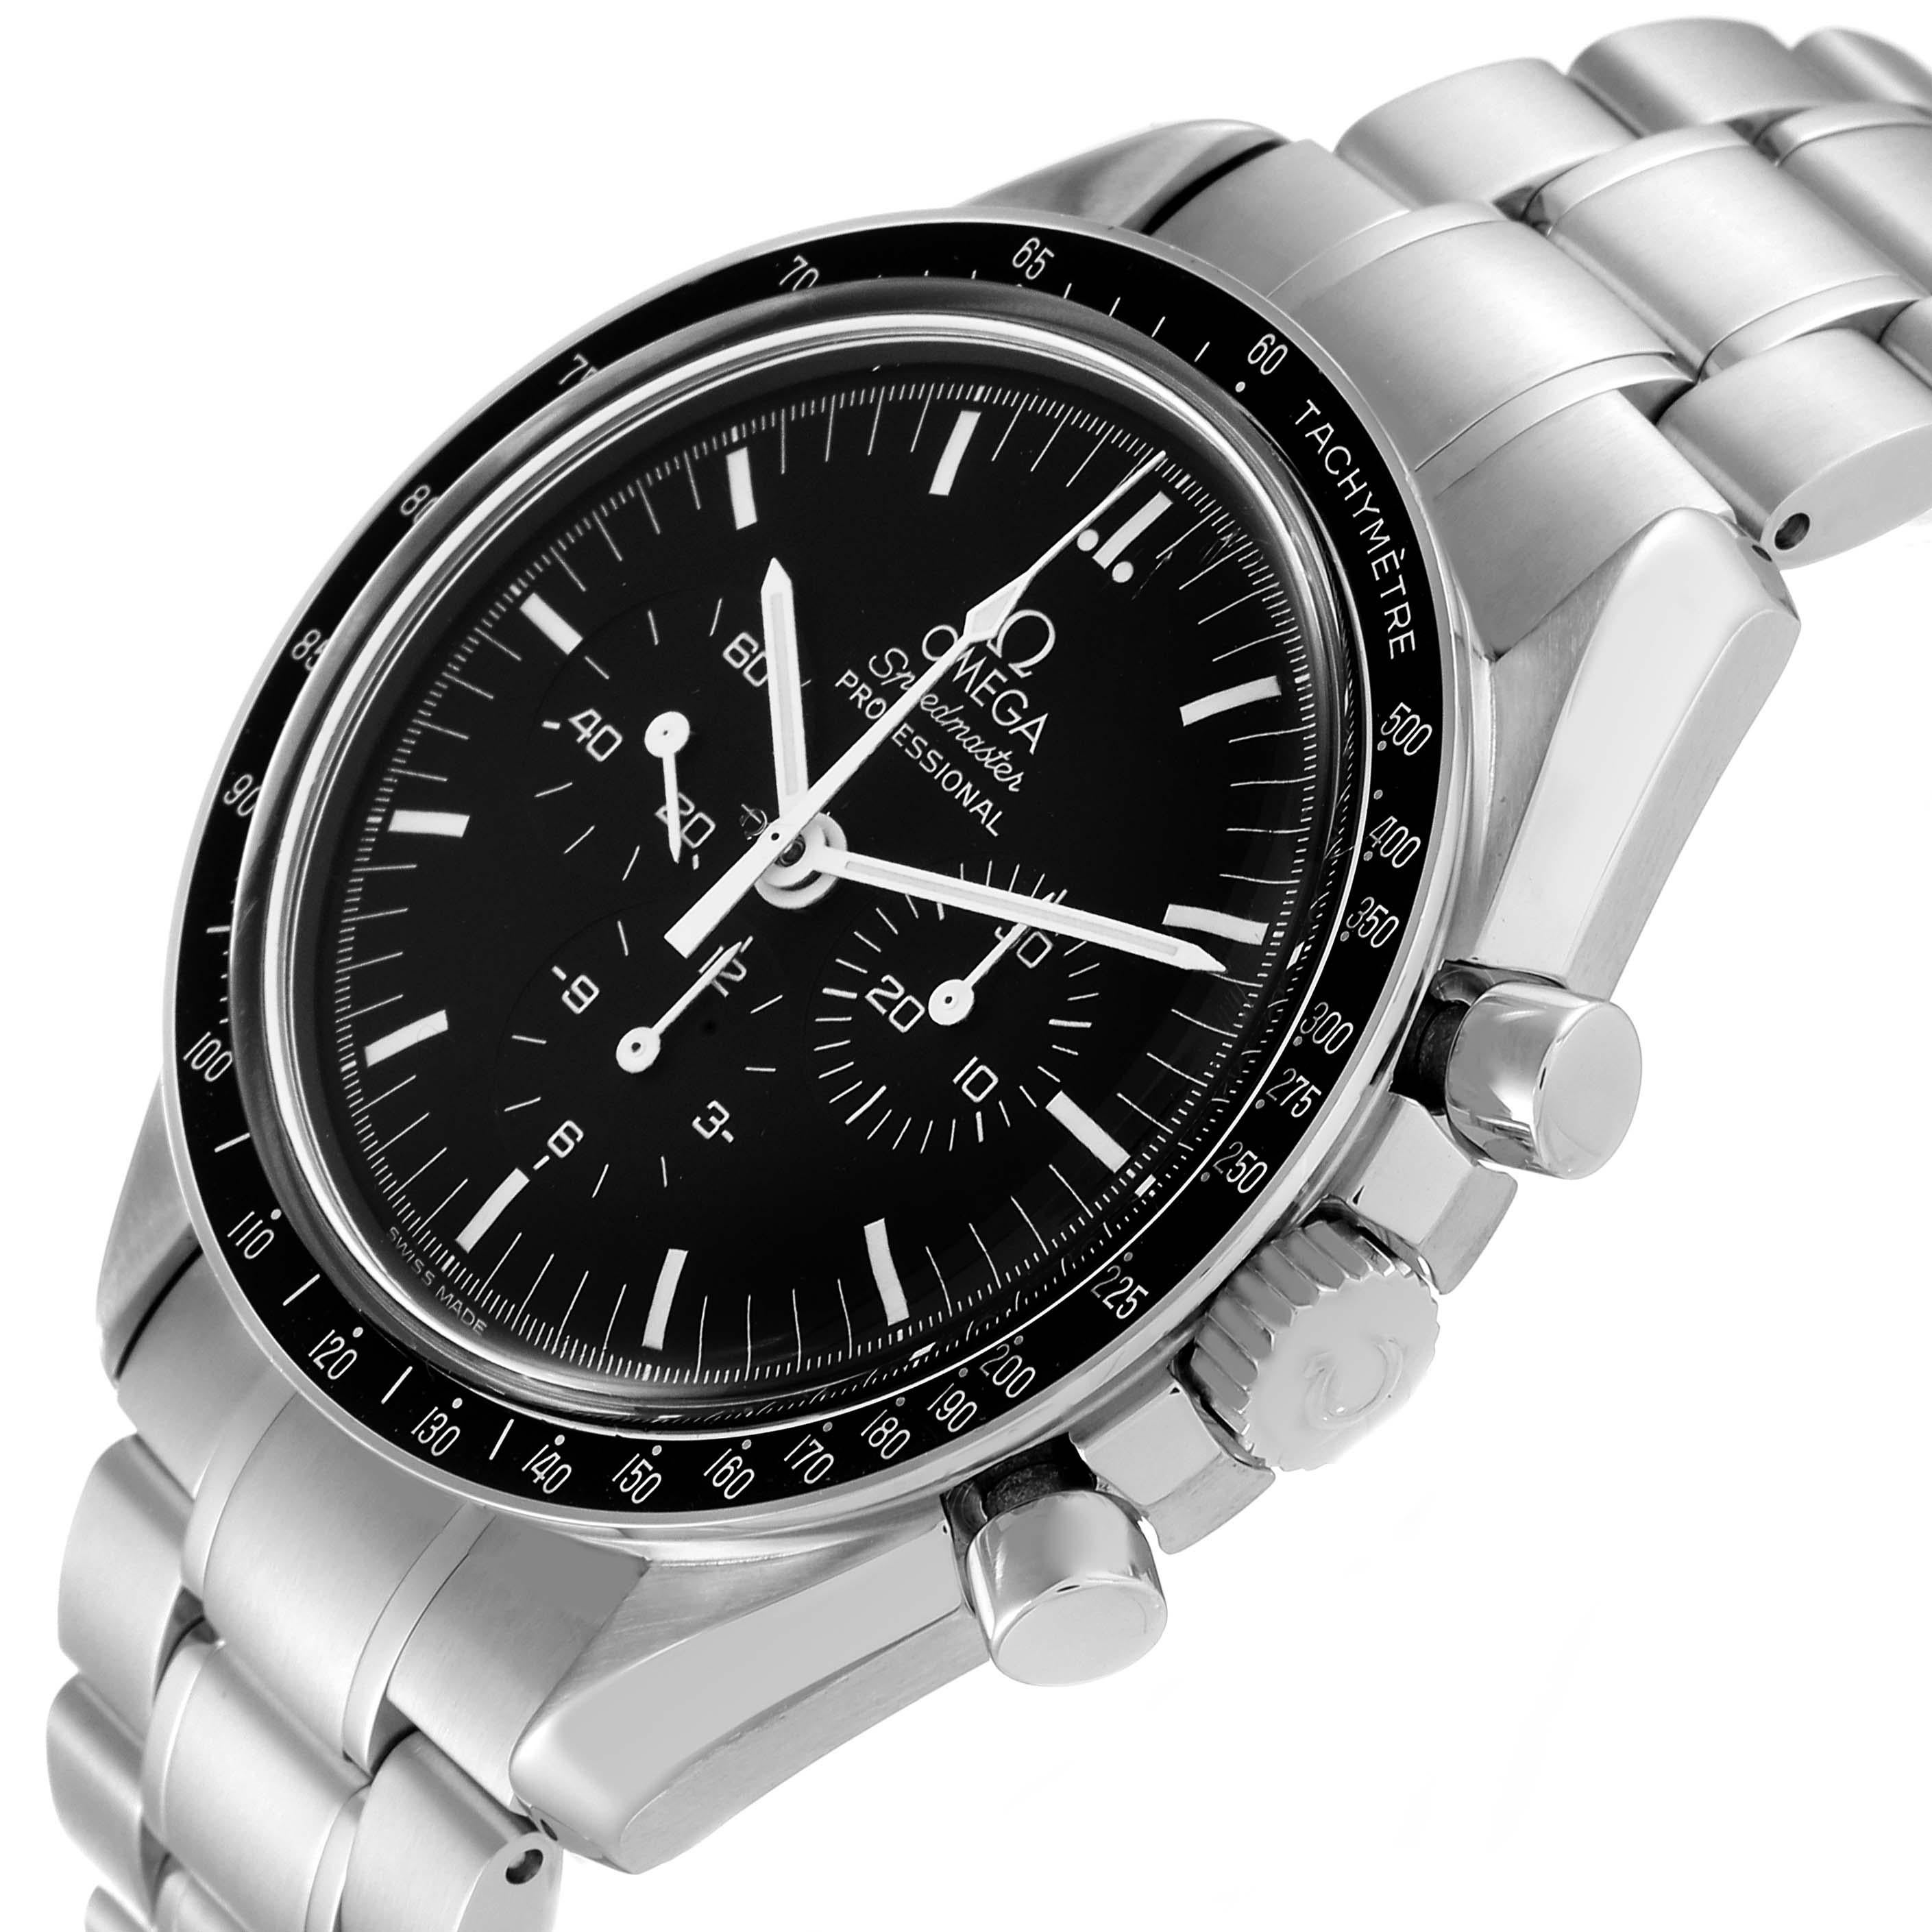 Omega Speedmaster MoonWatch Chronograph Steel Mens Watch 3570.50.00 Box Card. Manual winding chronograph movement. Stainless steel round case 42.0 mm in diameter. Stainless steel bezel with tachymetre function. Hesalite acrylic crystal. Black dial